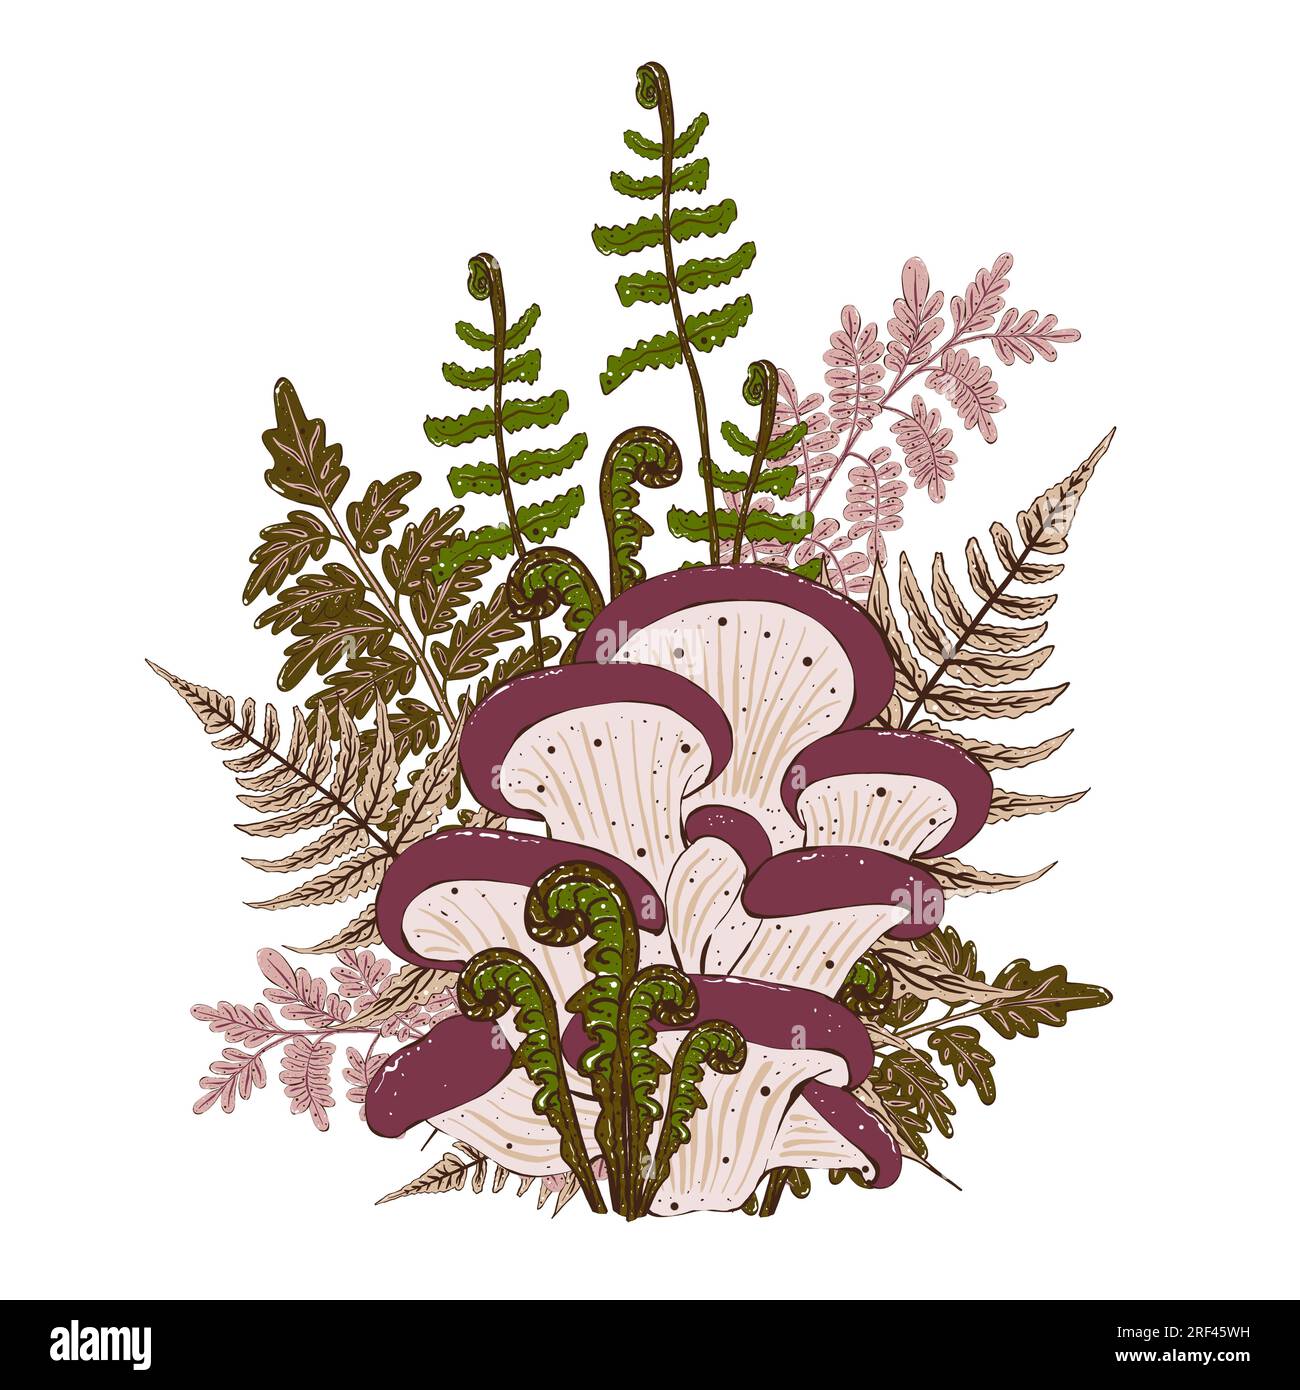 Composition of poisonous mushrooms and fern leaves. Mystical illustration in cartoon style Stock Photo